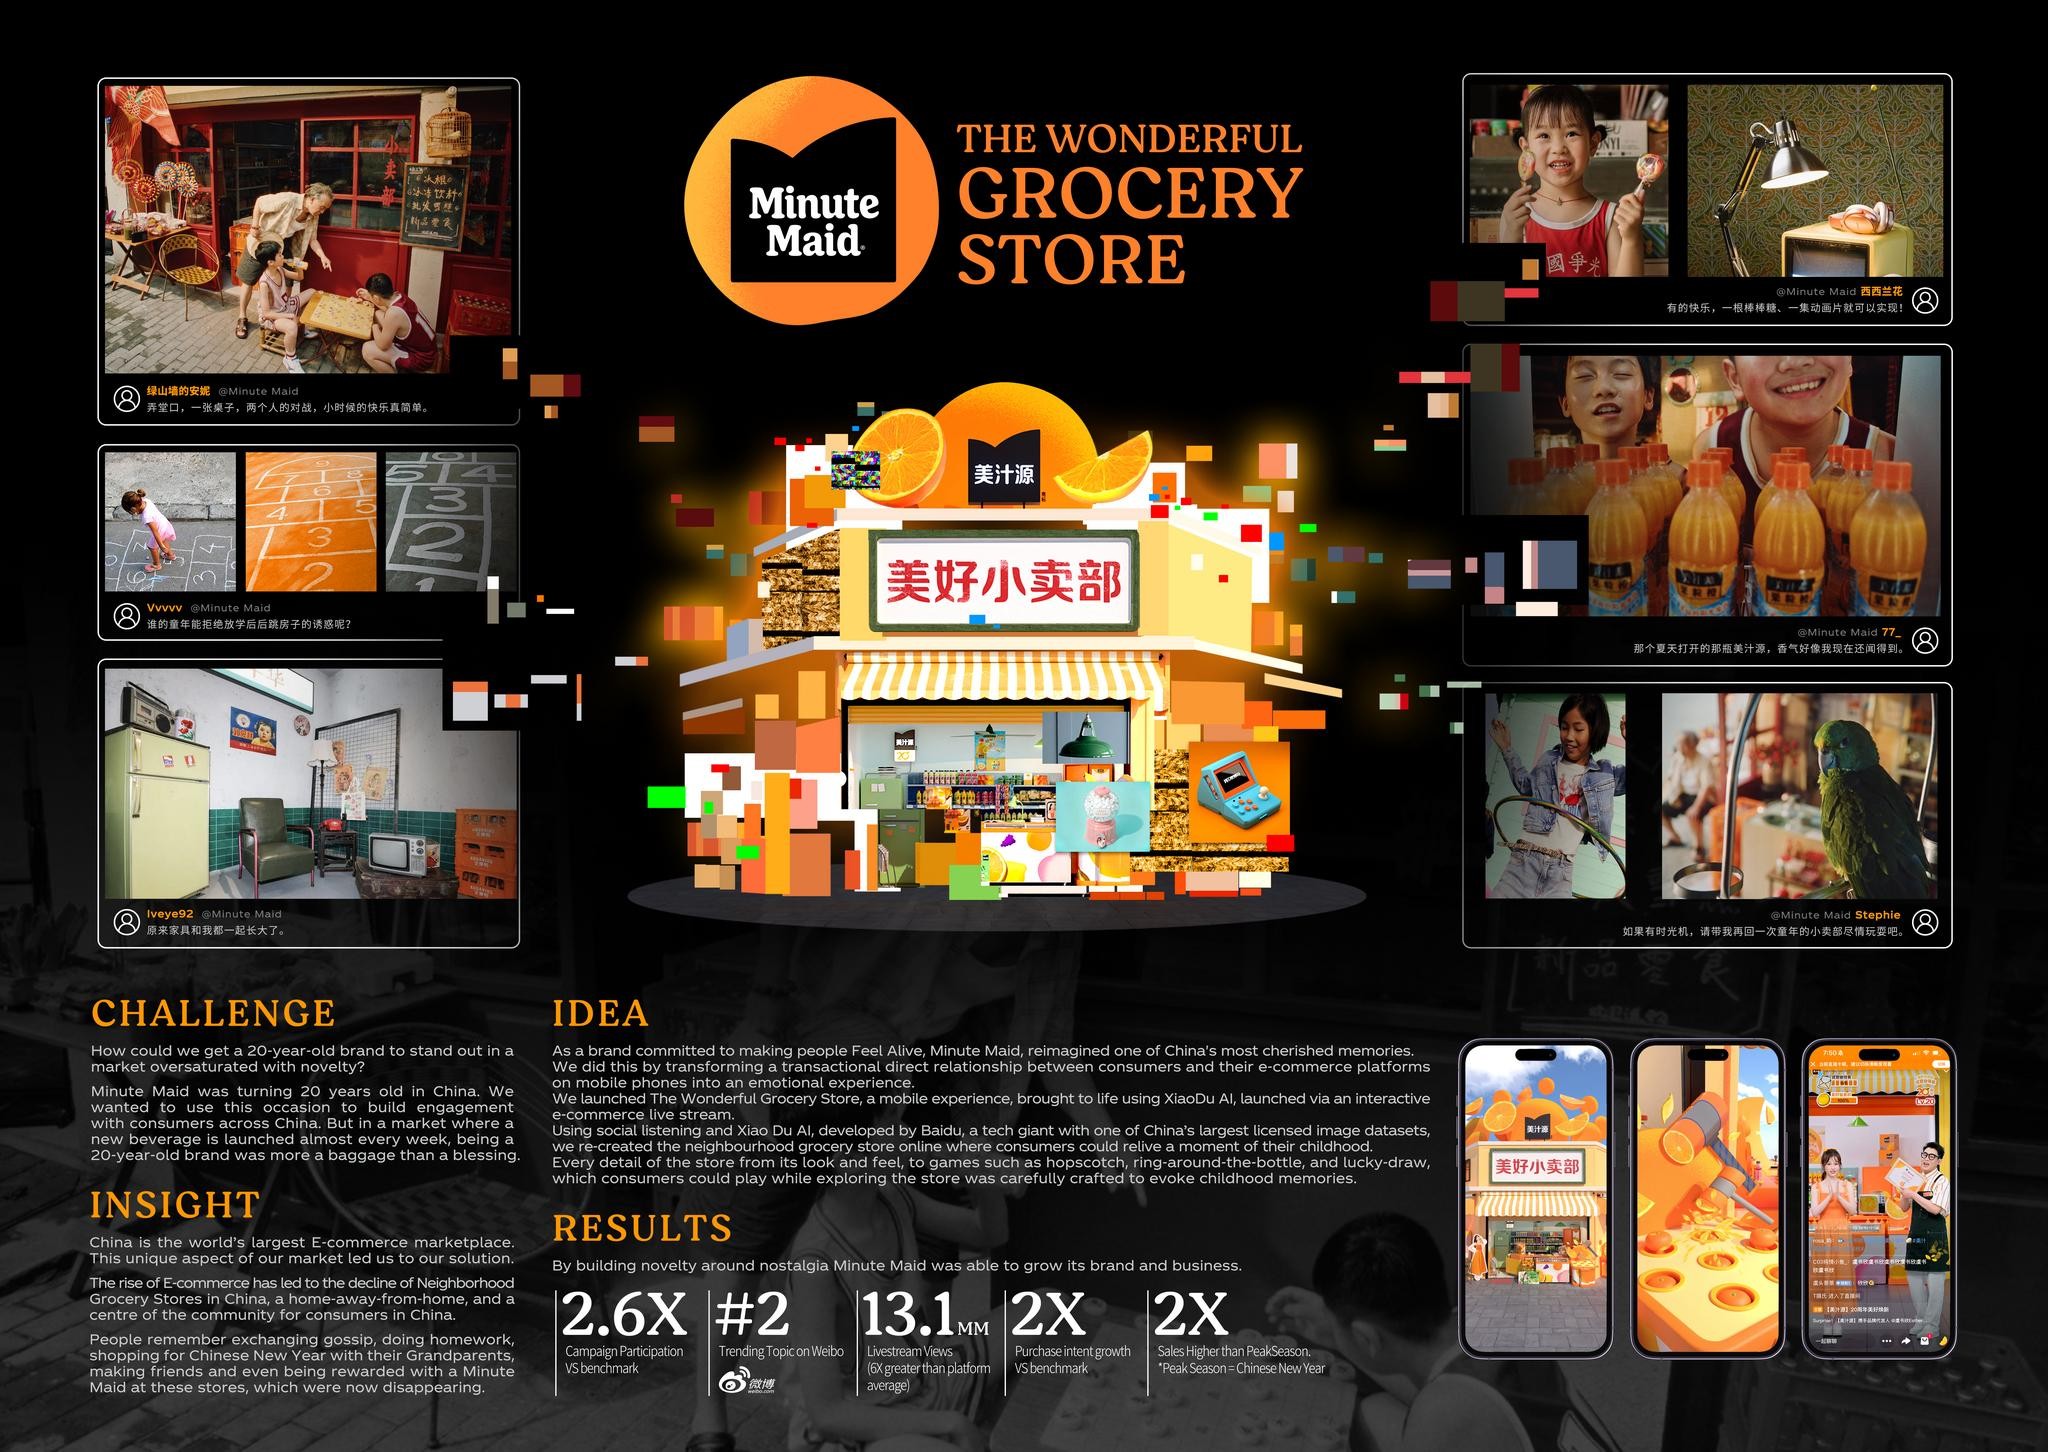 Minute Maid "The Wonderful Grocery Store"